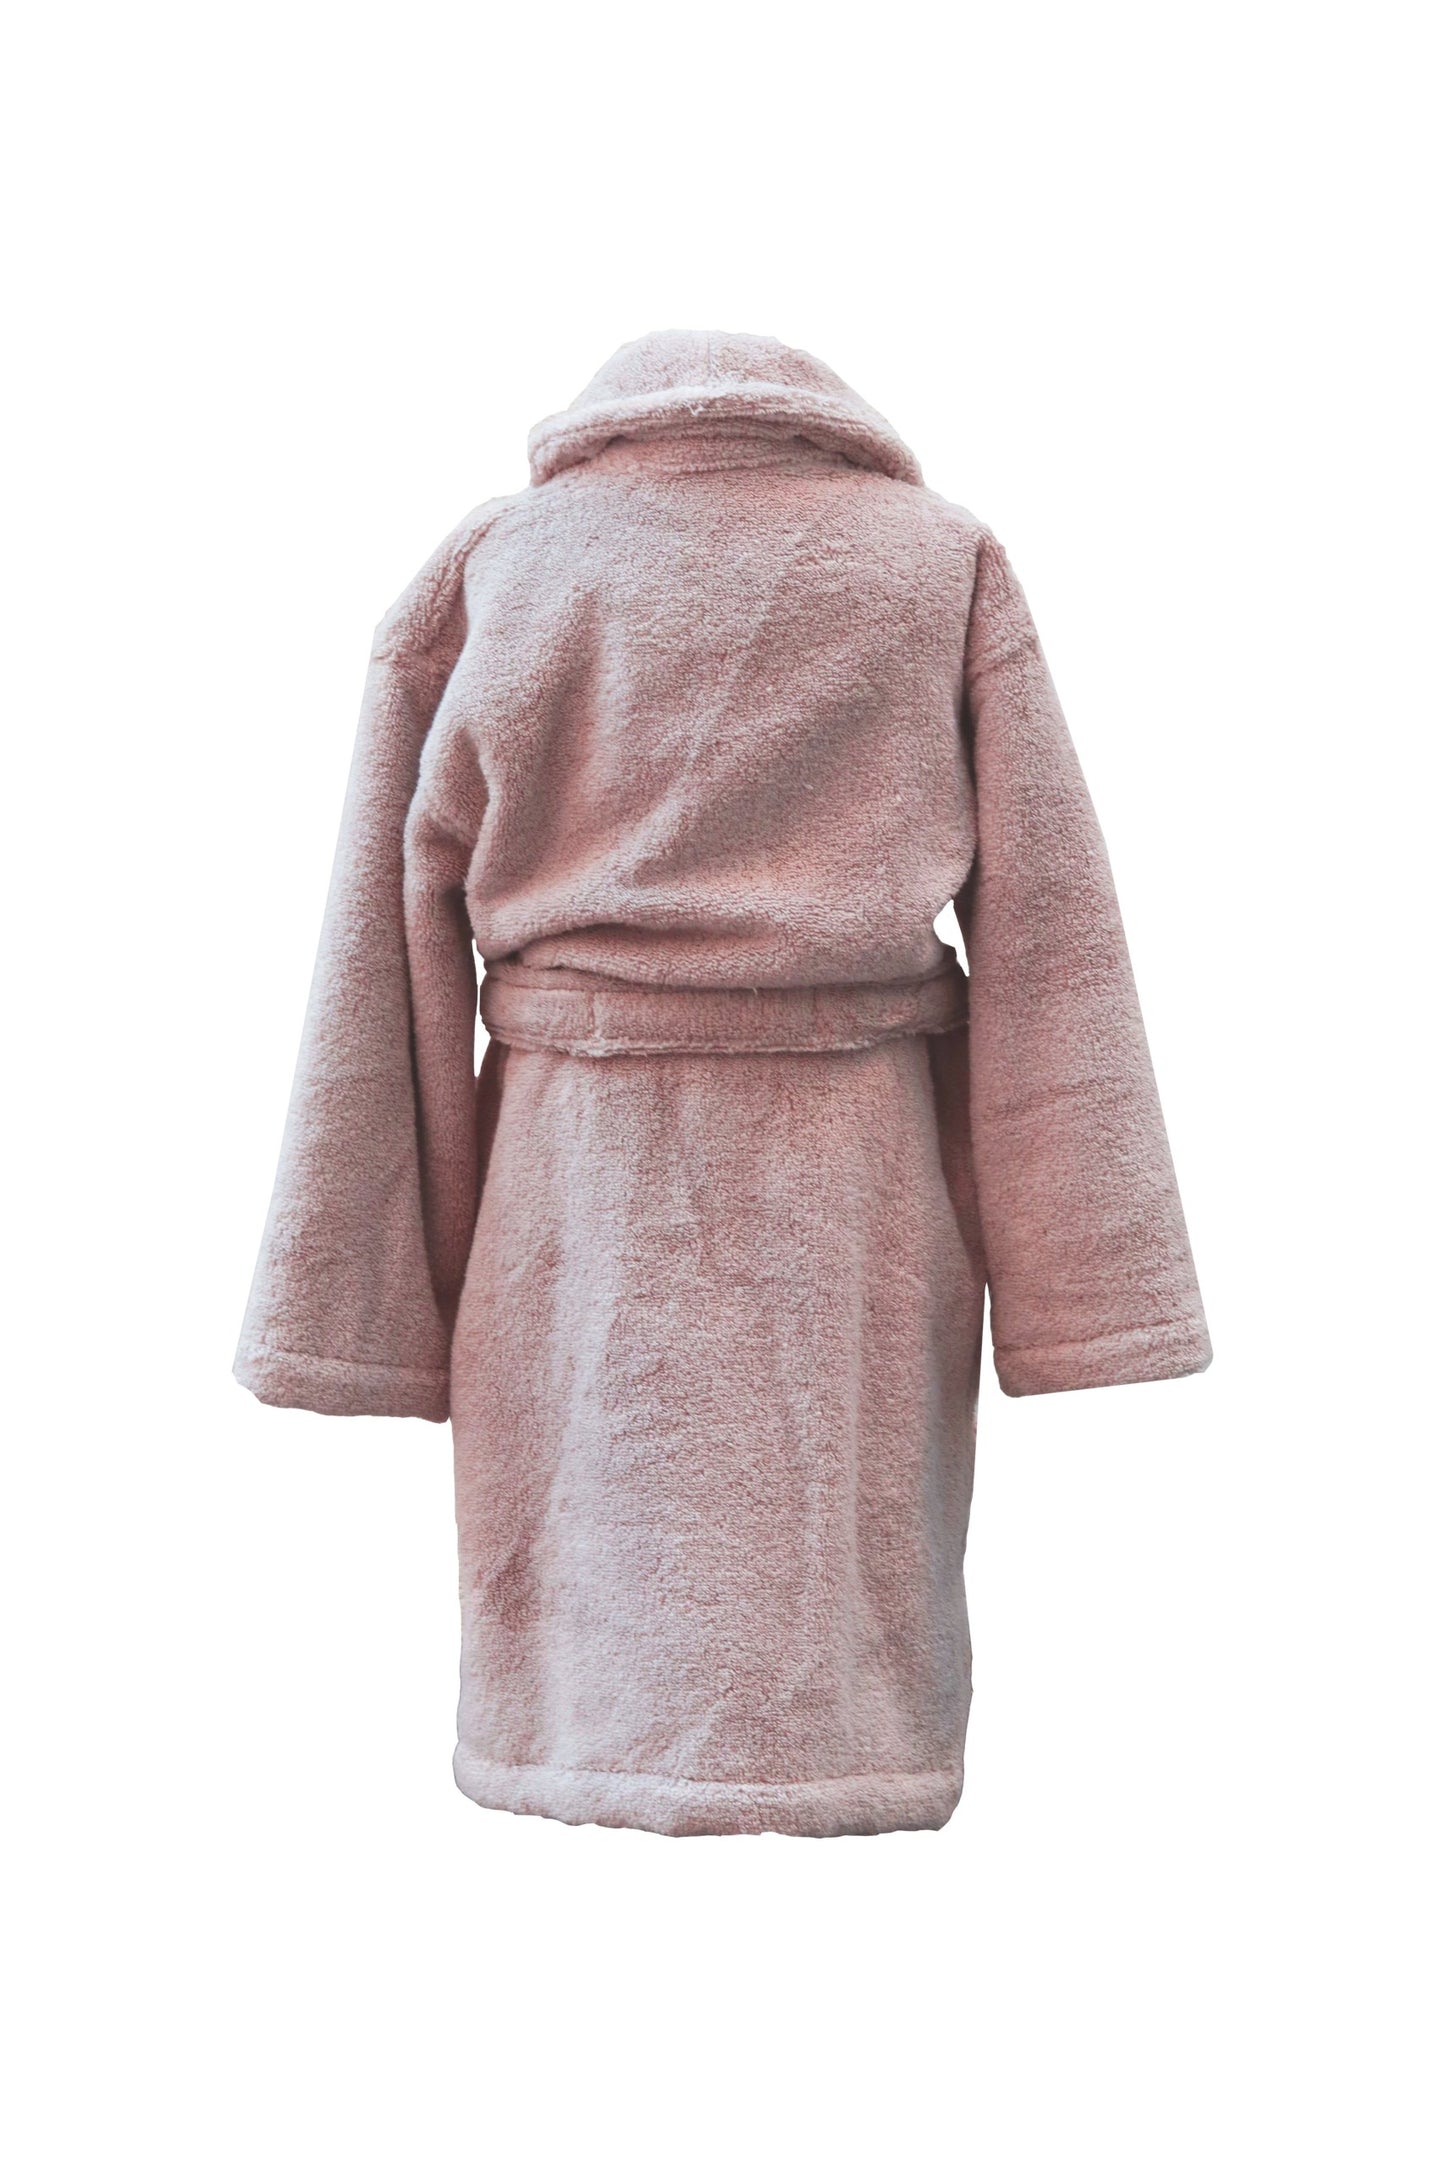 Luin Living Bathrobe for the Whole Family, 8 different sizes, Dusty Rose